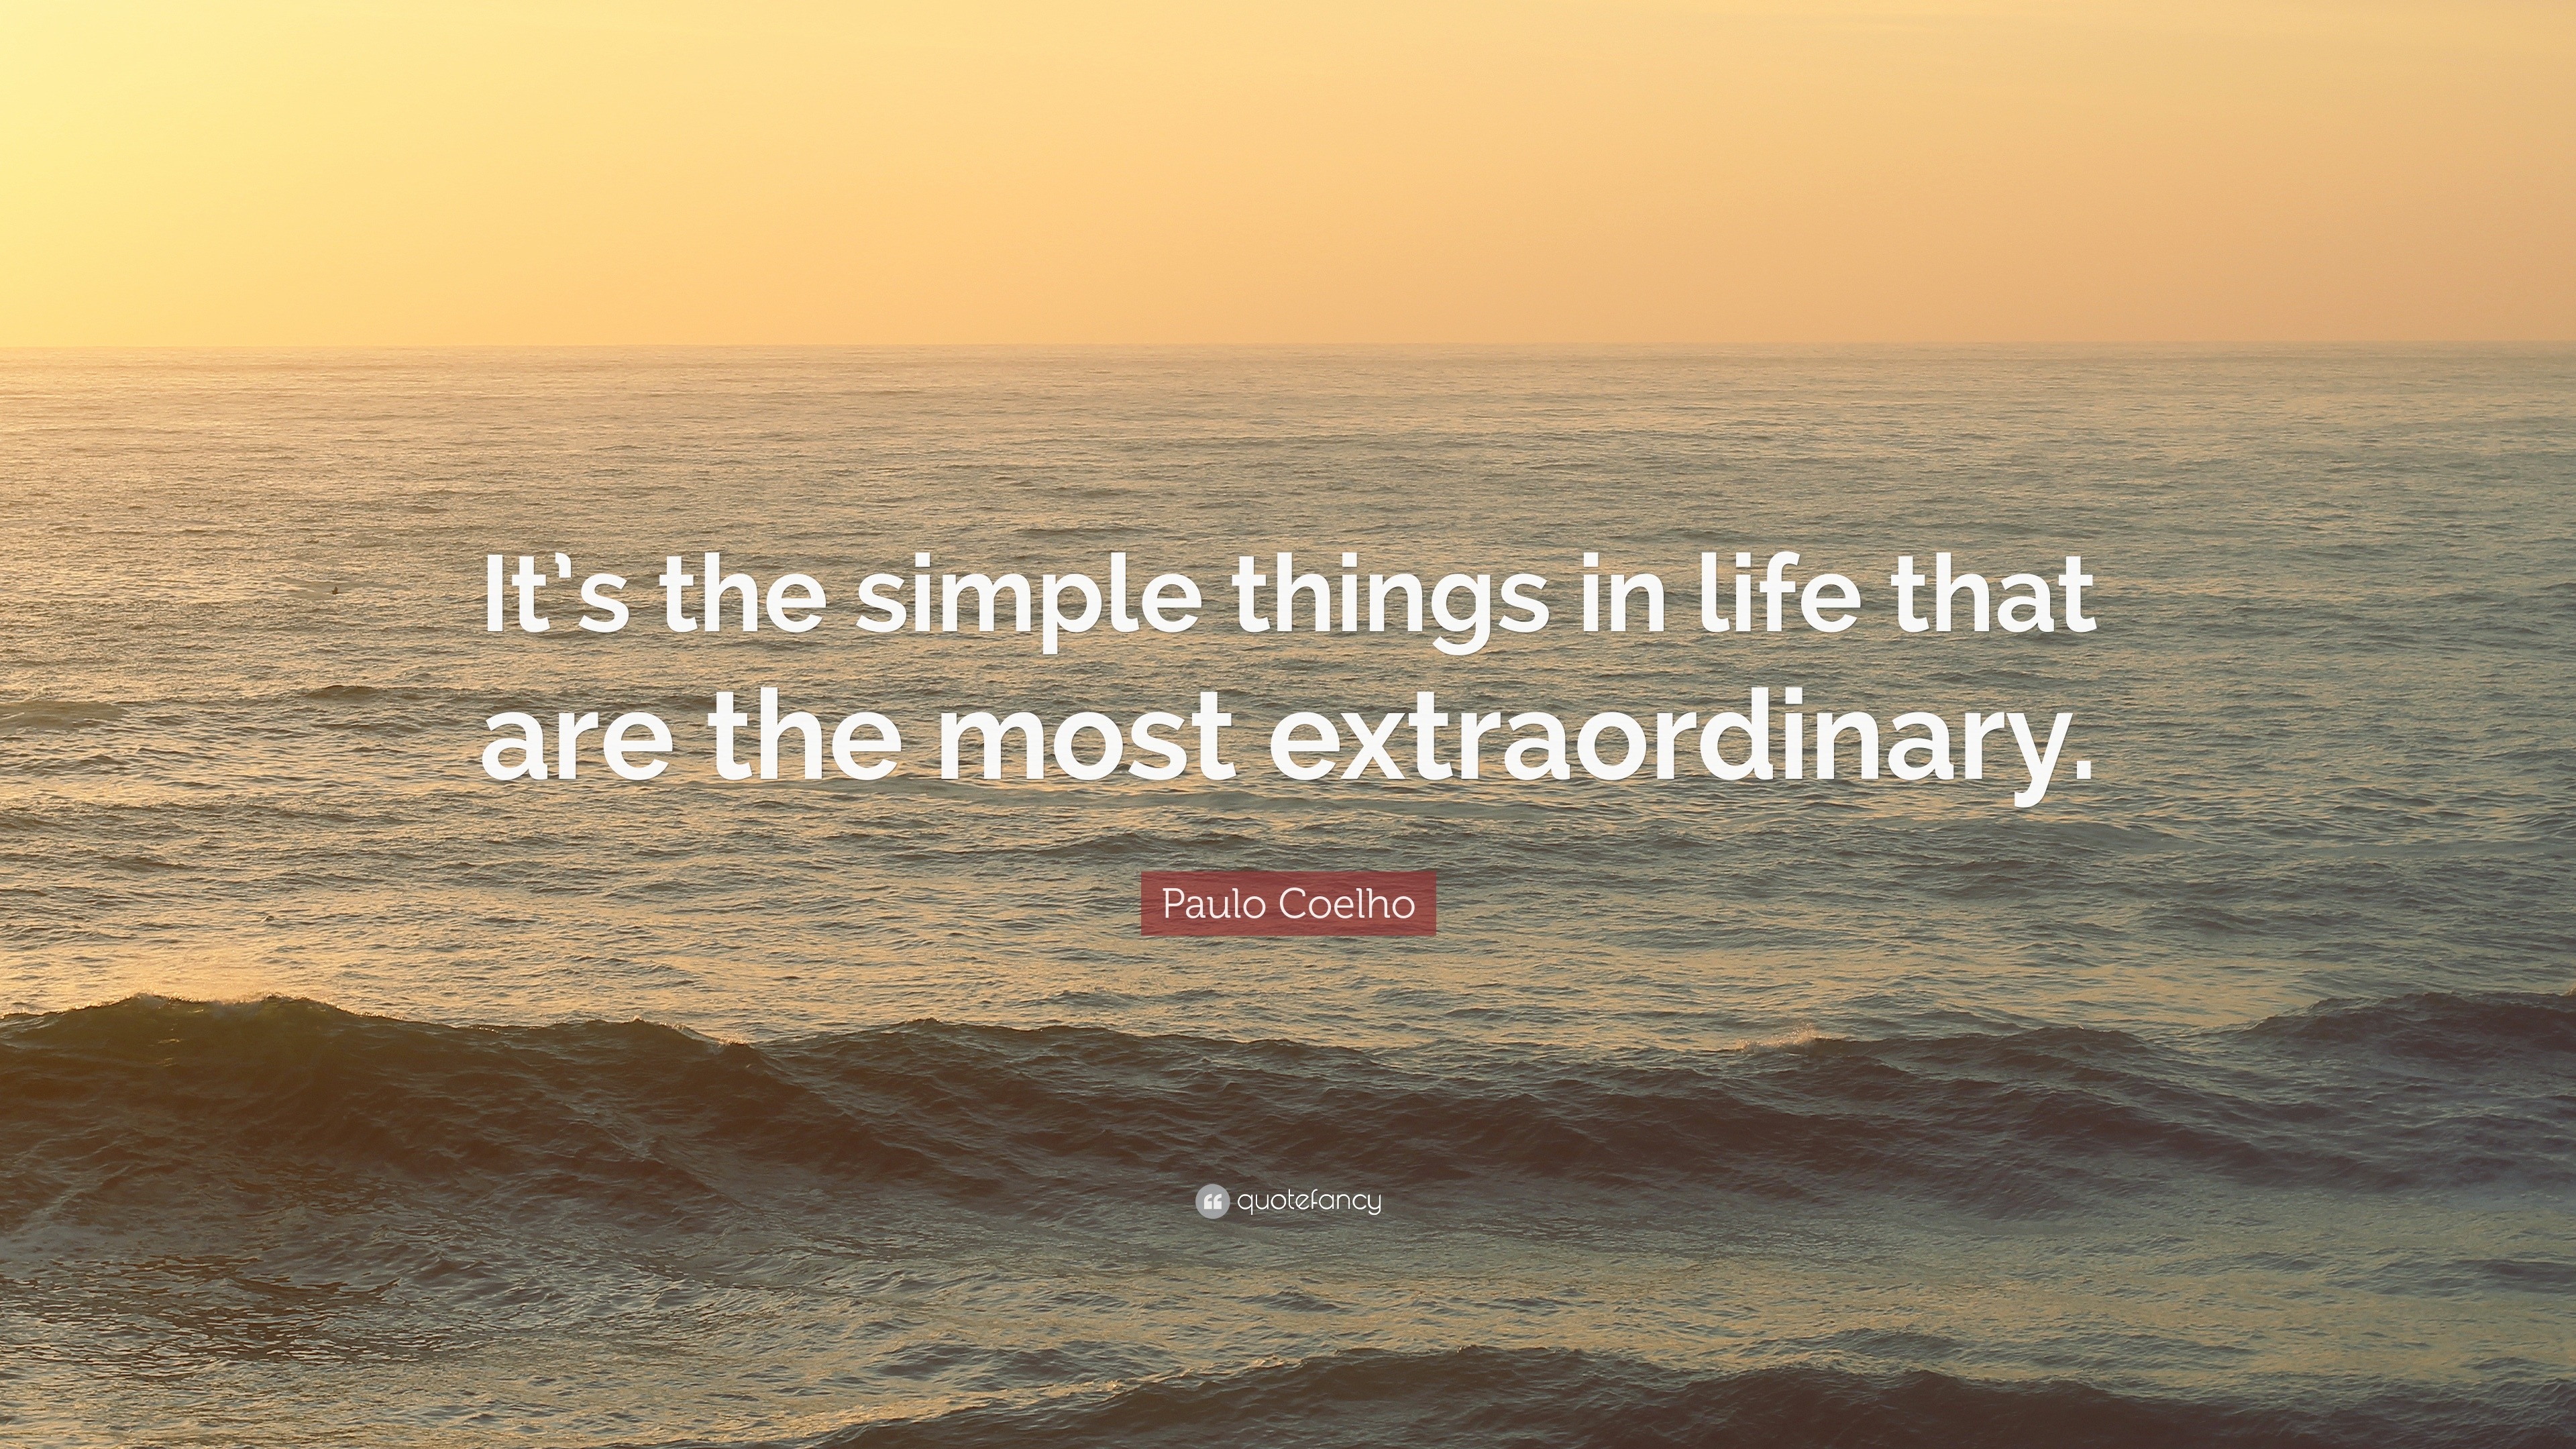 Paulo Coelho Quote It S The Simple Things In Life That Are The Most Extraordinary 12 Wallpapers Quotefancy